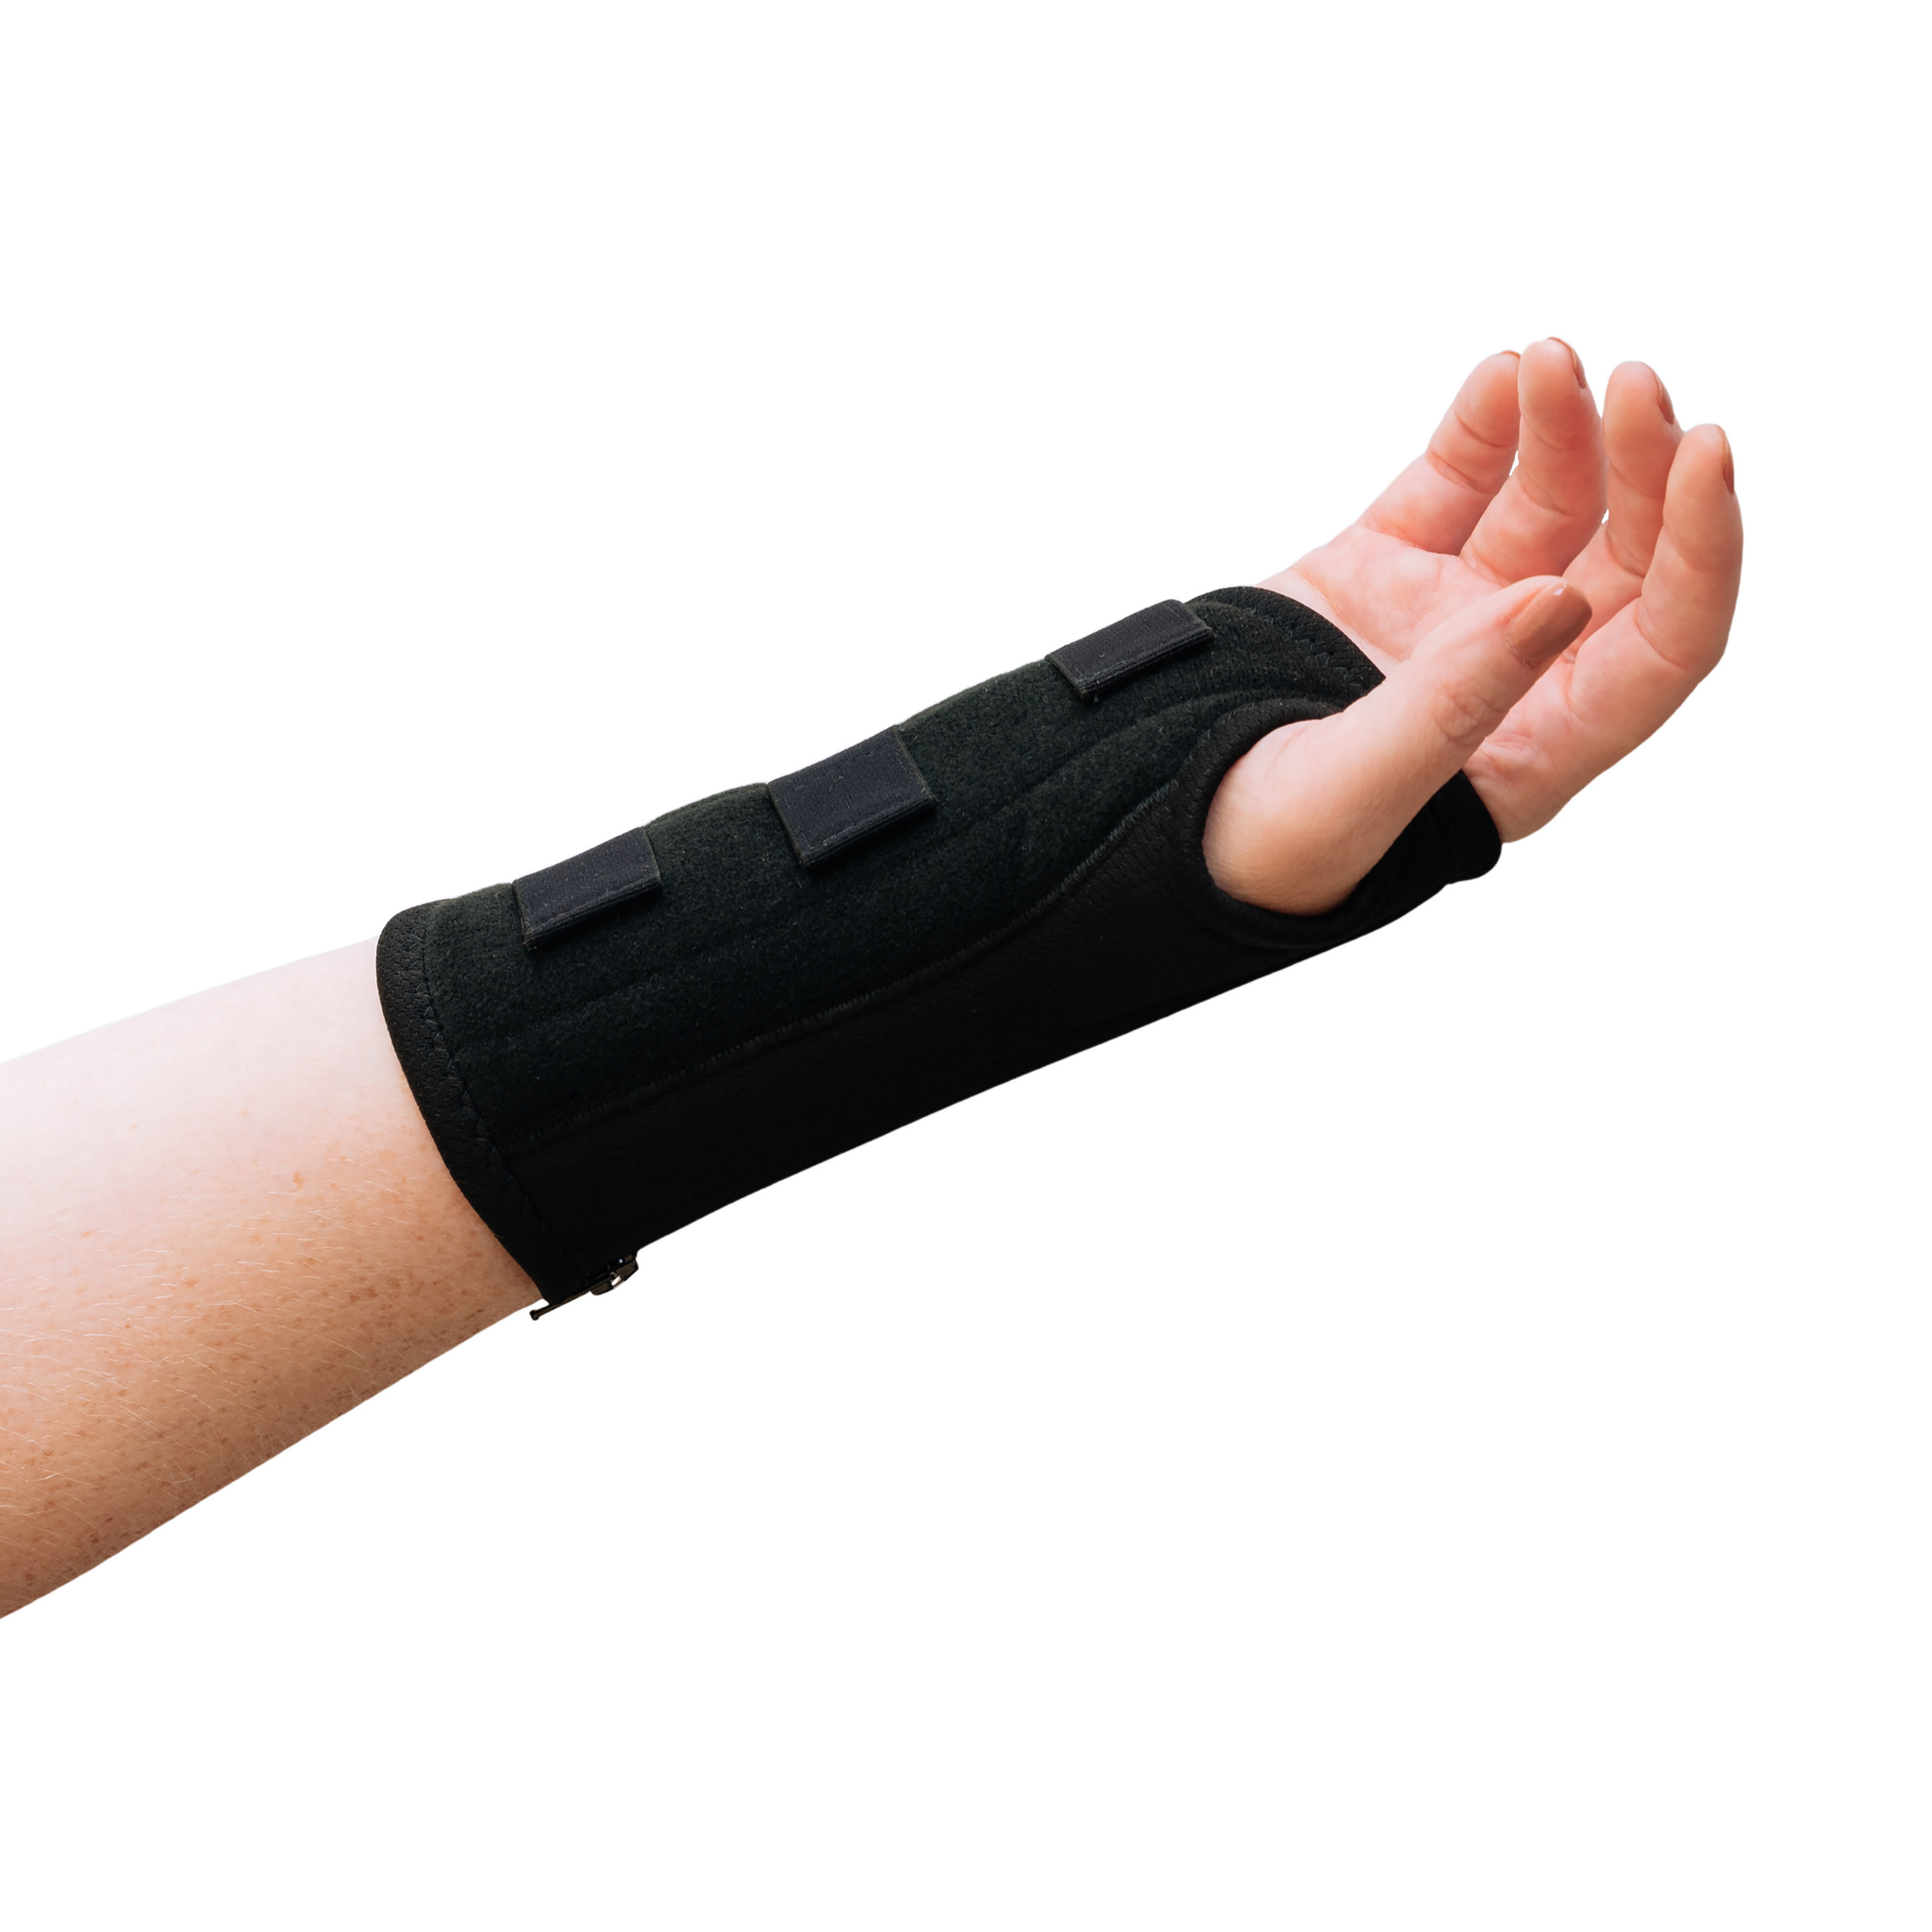 A woman with arthritis is showing her hand in close-up, wearing a Classic Black Wrist Brace with straps. The background is white.